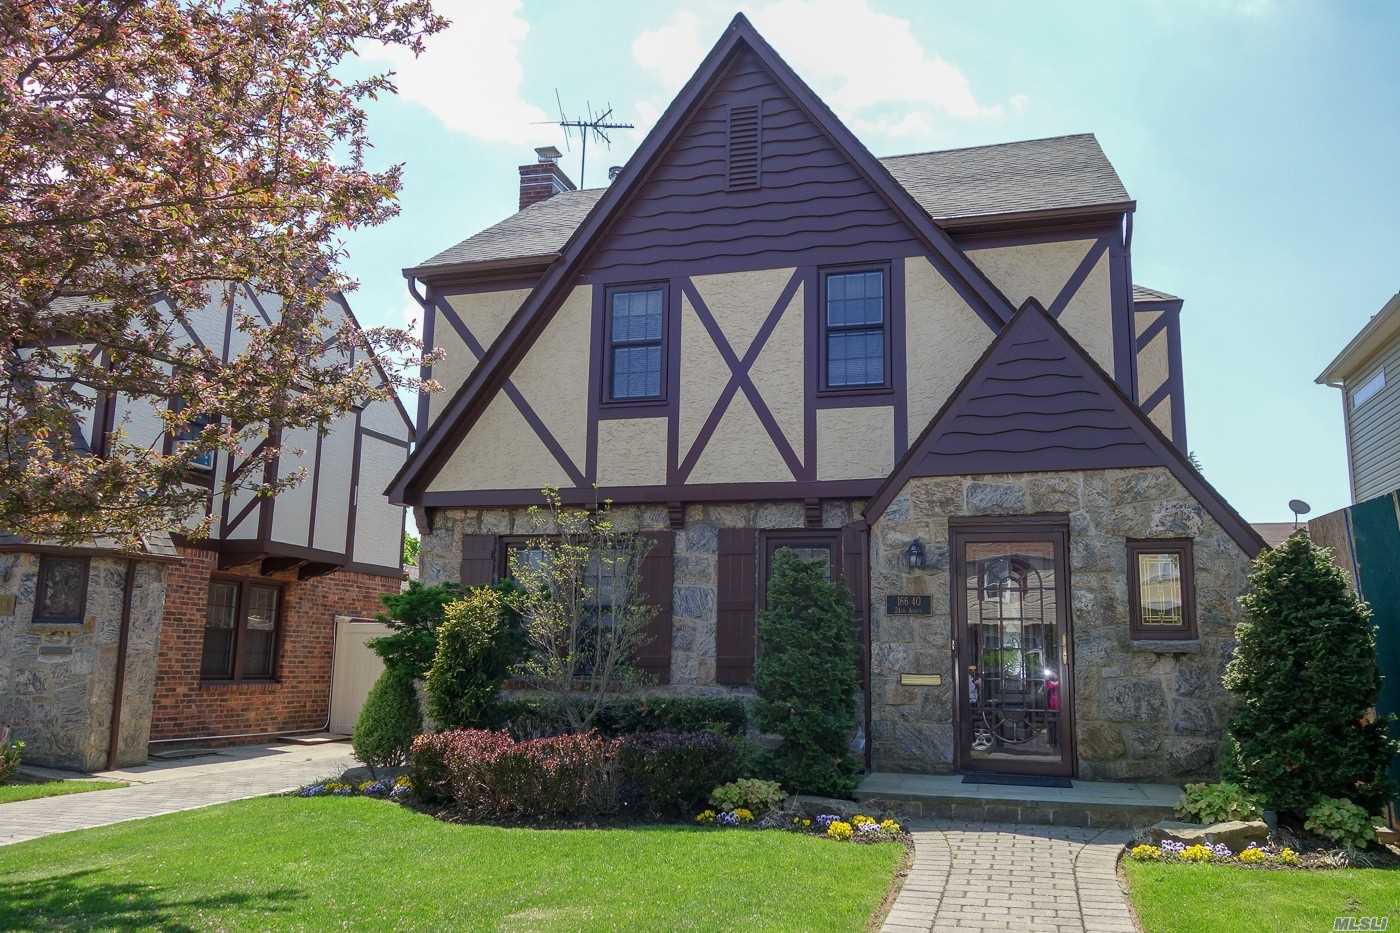 One Of A Kind 4Br English Tudor, Recently Renovated And Expanded. Featuring A Large Open Kitchen, Master Suite, And Full Finished Basement, The Property Also Boasts A Wonderful Outdoor Setup With A Jacuzzi Hot Tub. Located In The Heart Of Whitestone, Close To All Major Shopping, Highways, And Public Transportation.